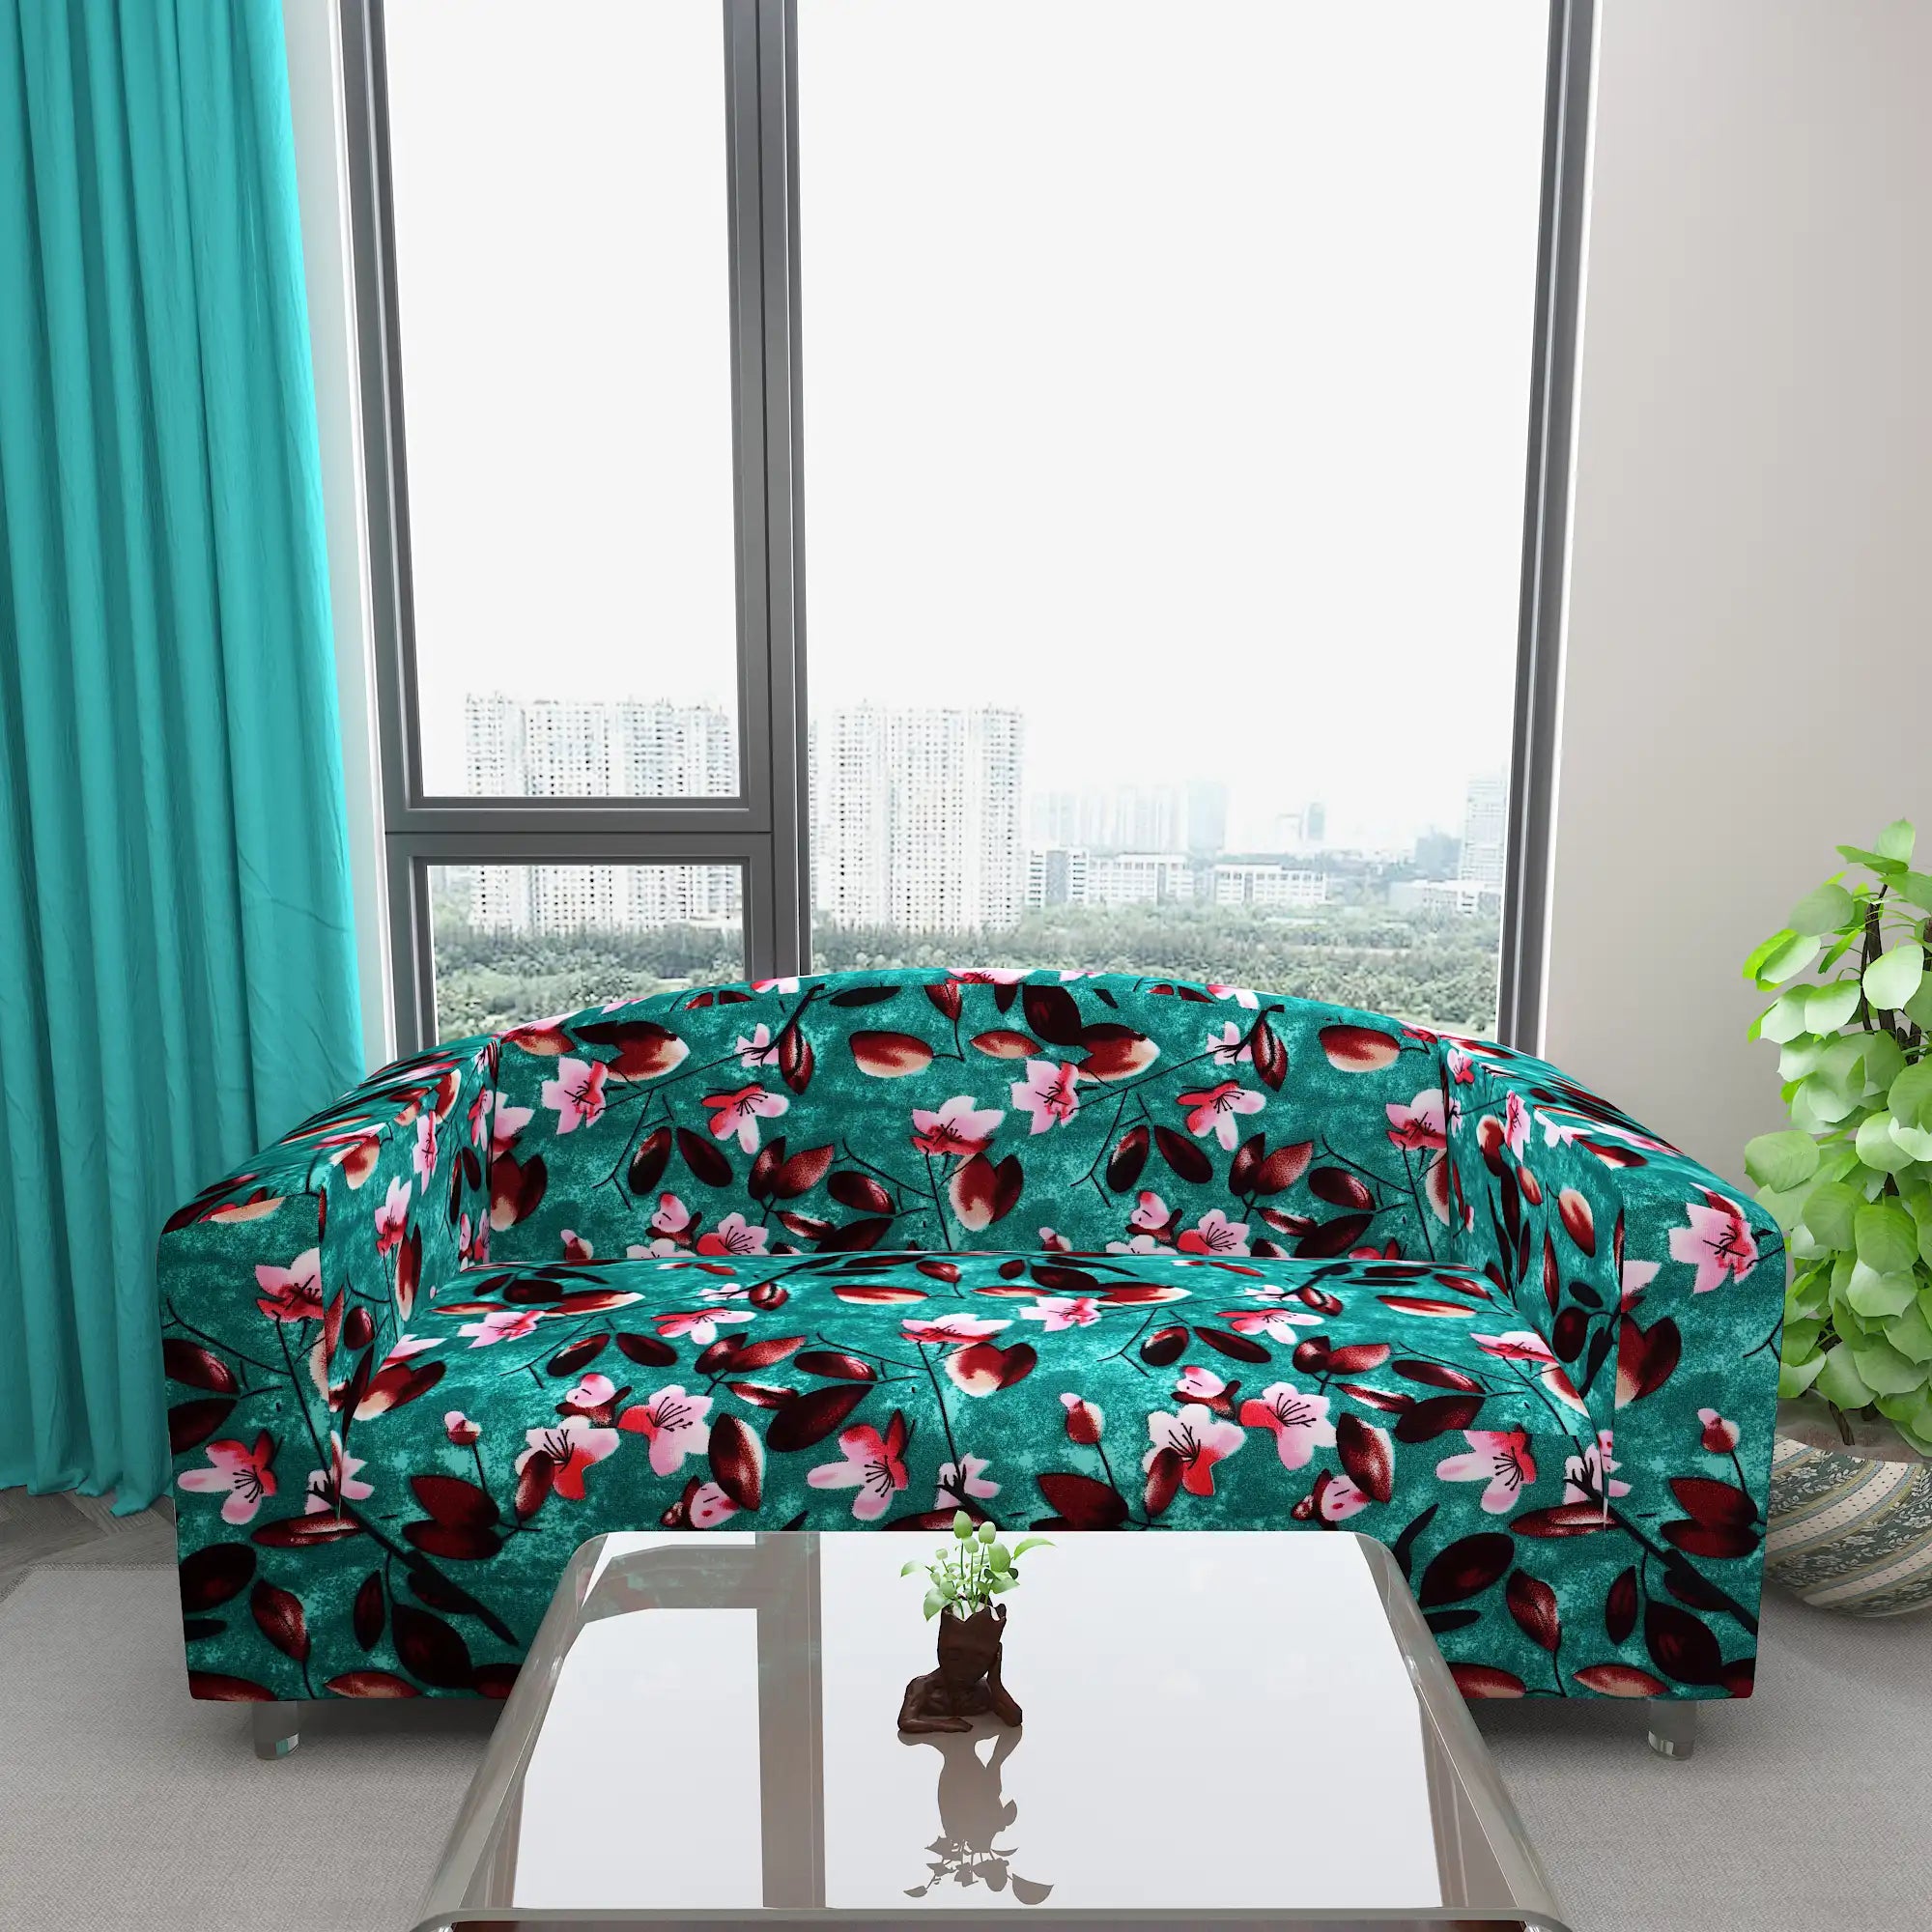 Waterproof Printed Sofa Protector Cover Full Stretchable, SP11